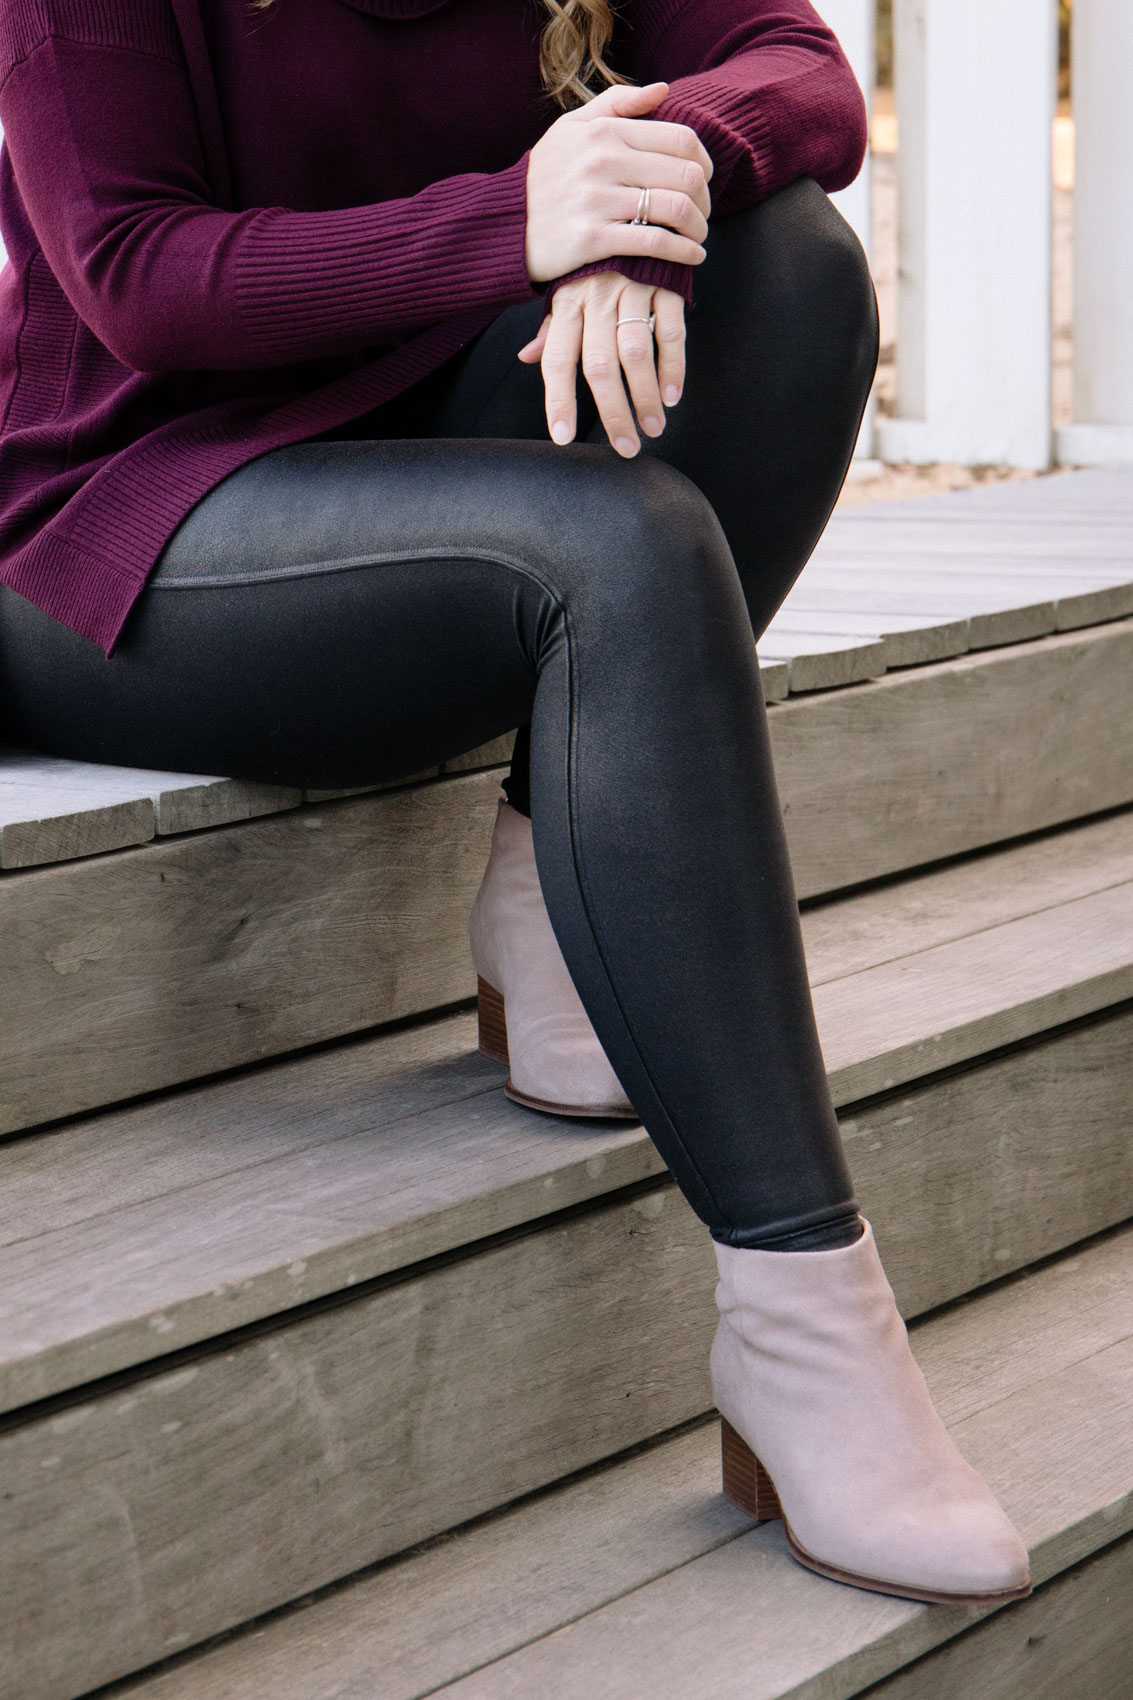 Spanx Faux Leather Leggings review: Are they worth the price